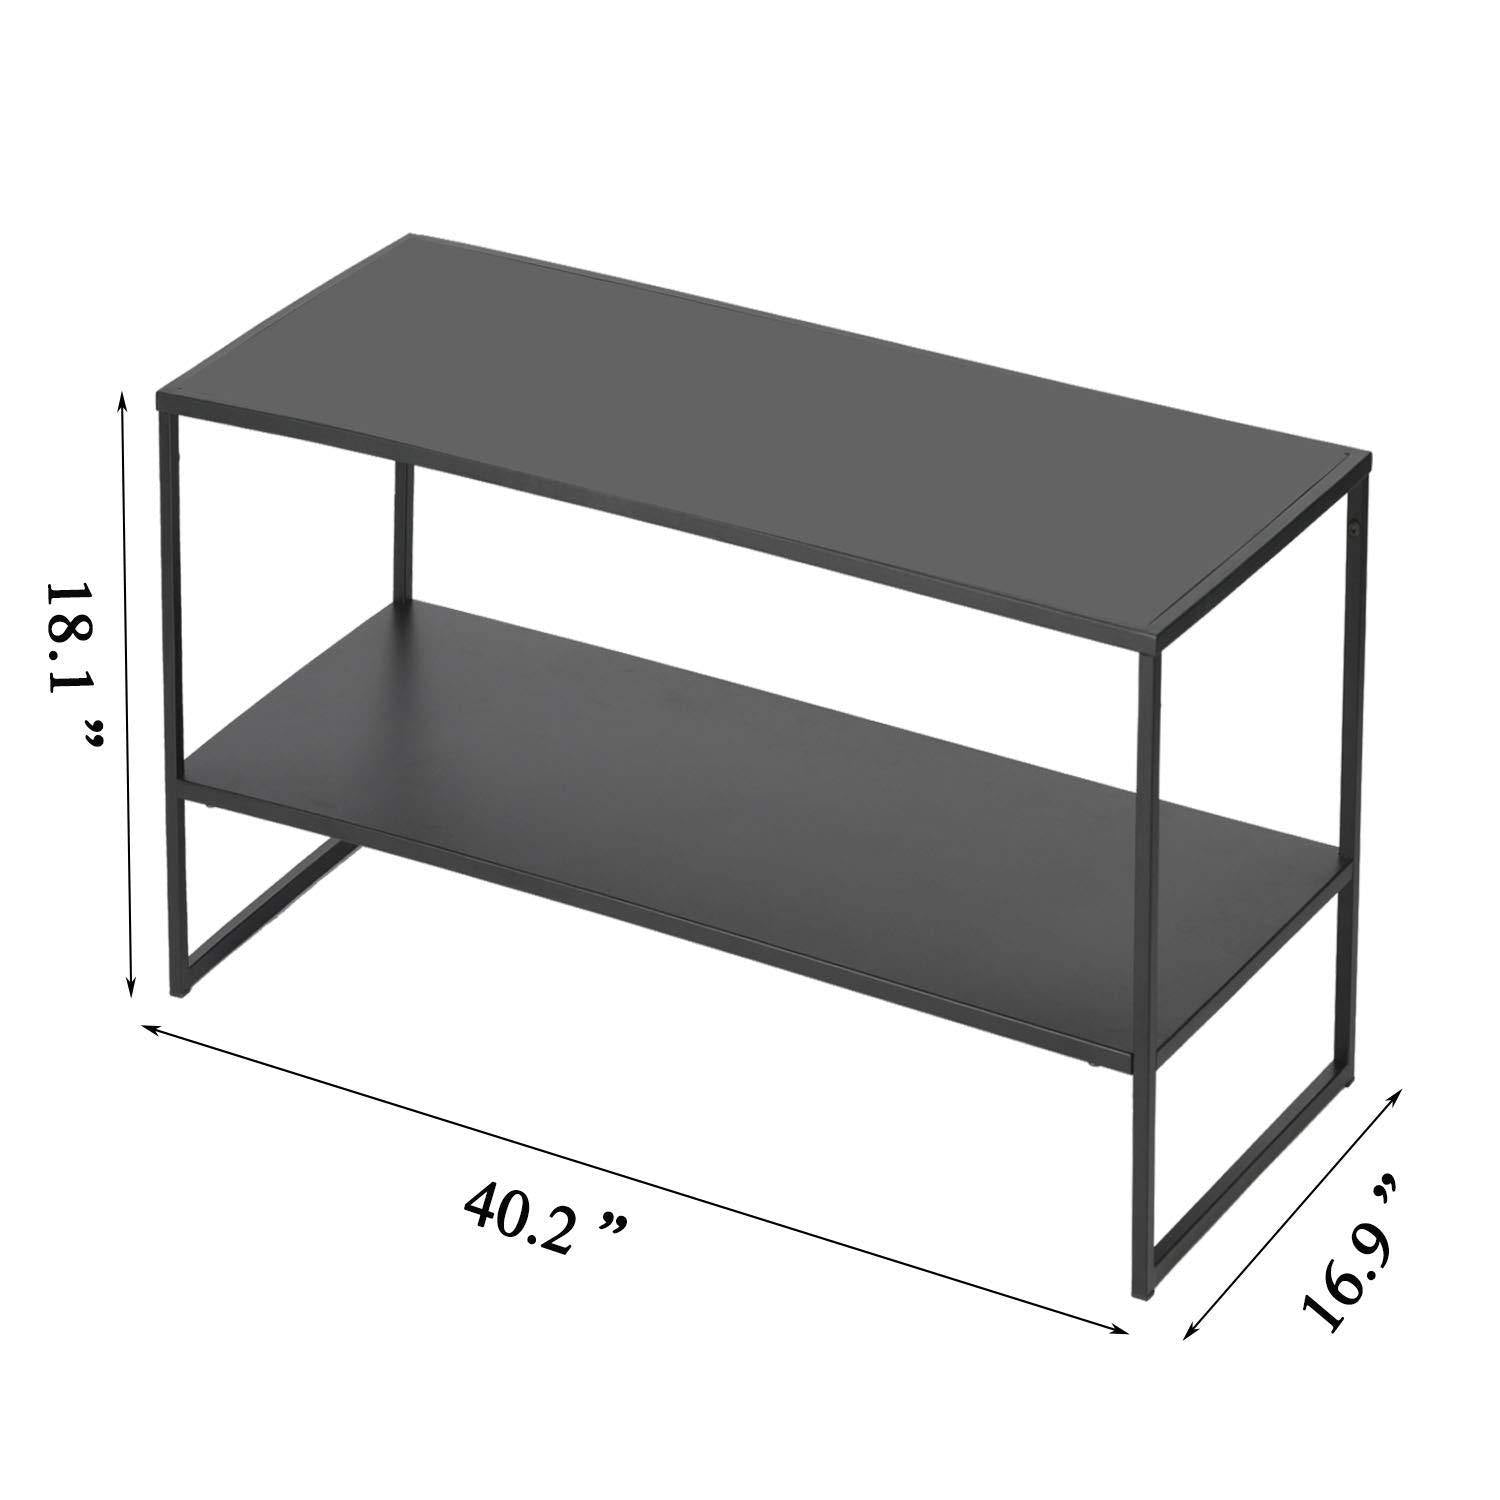 Simple Coffee Table with Anti-Scratch Design 2 Tire Industrial Cocktail Table for Living Room Black - Bosonshop